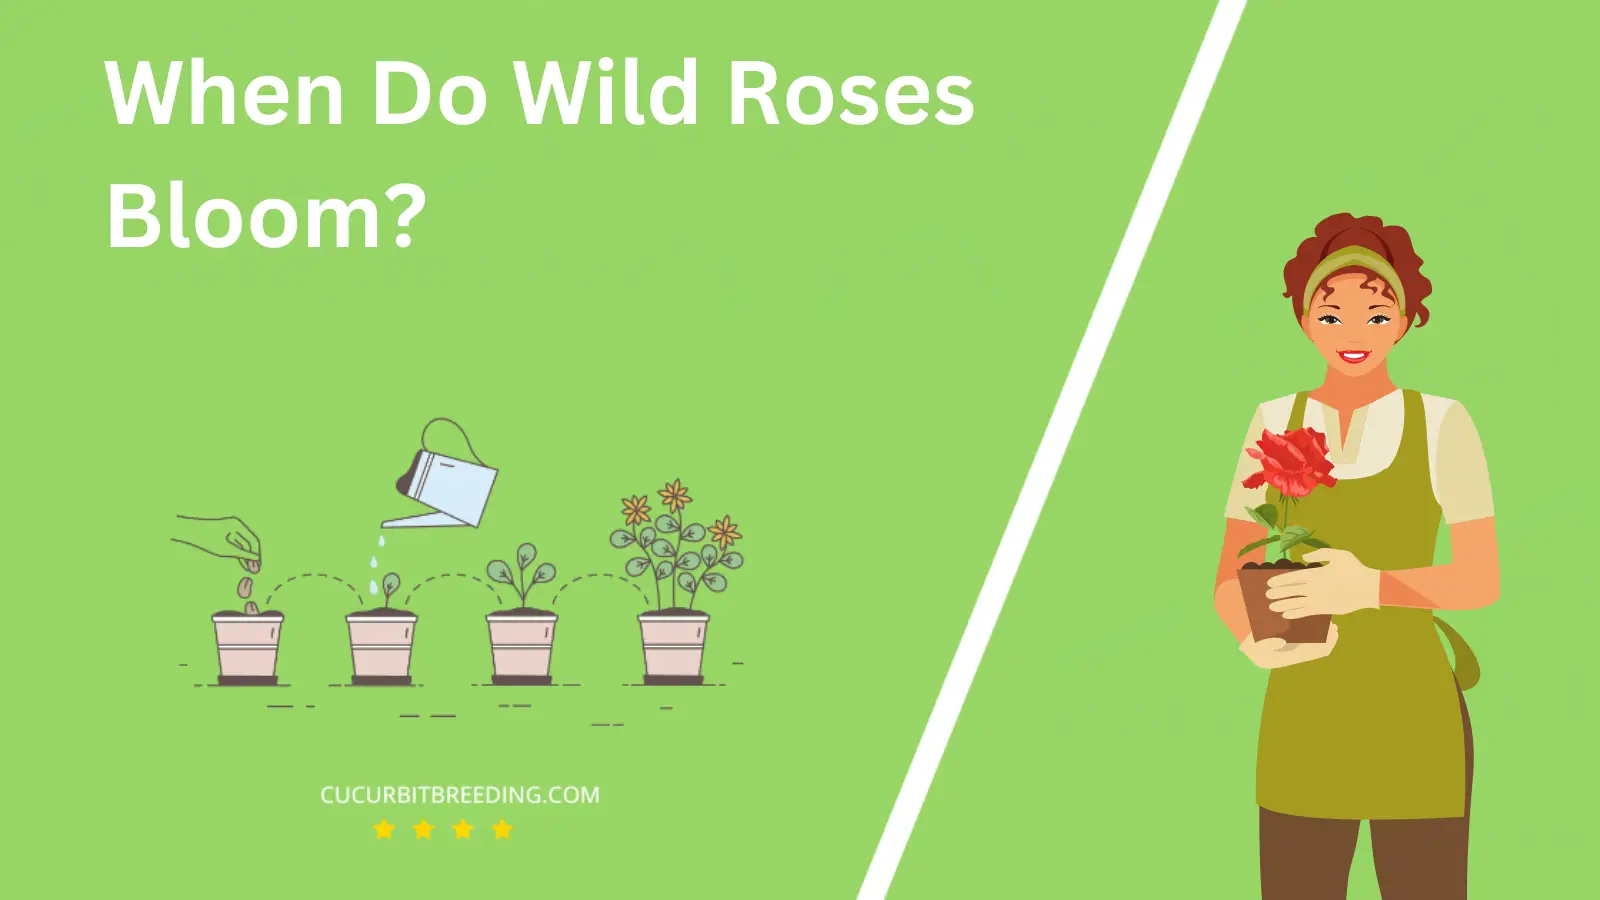 When Do Wild Roses Bloom?